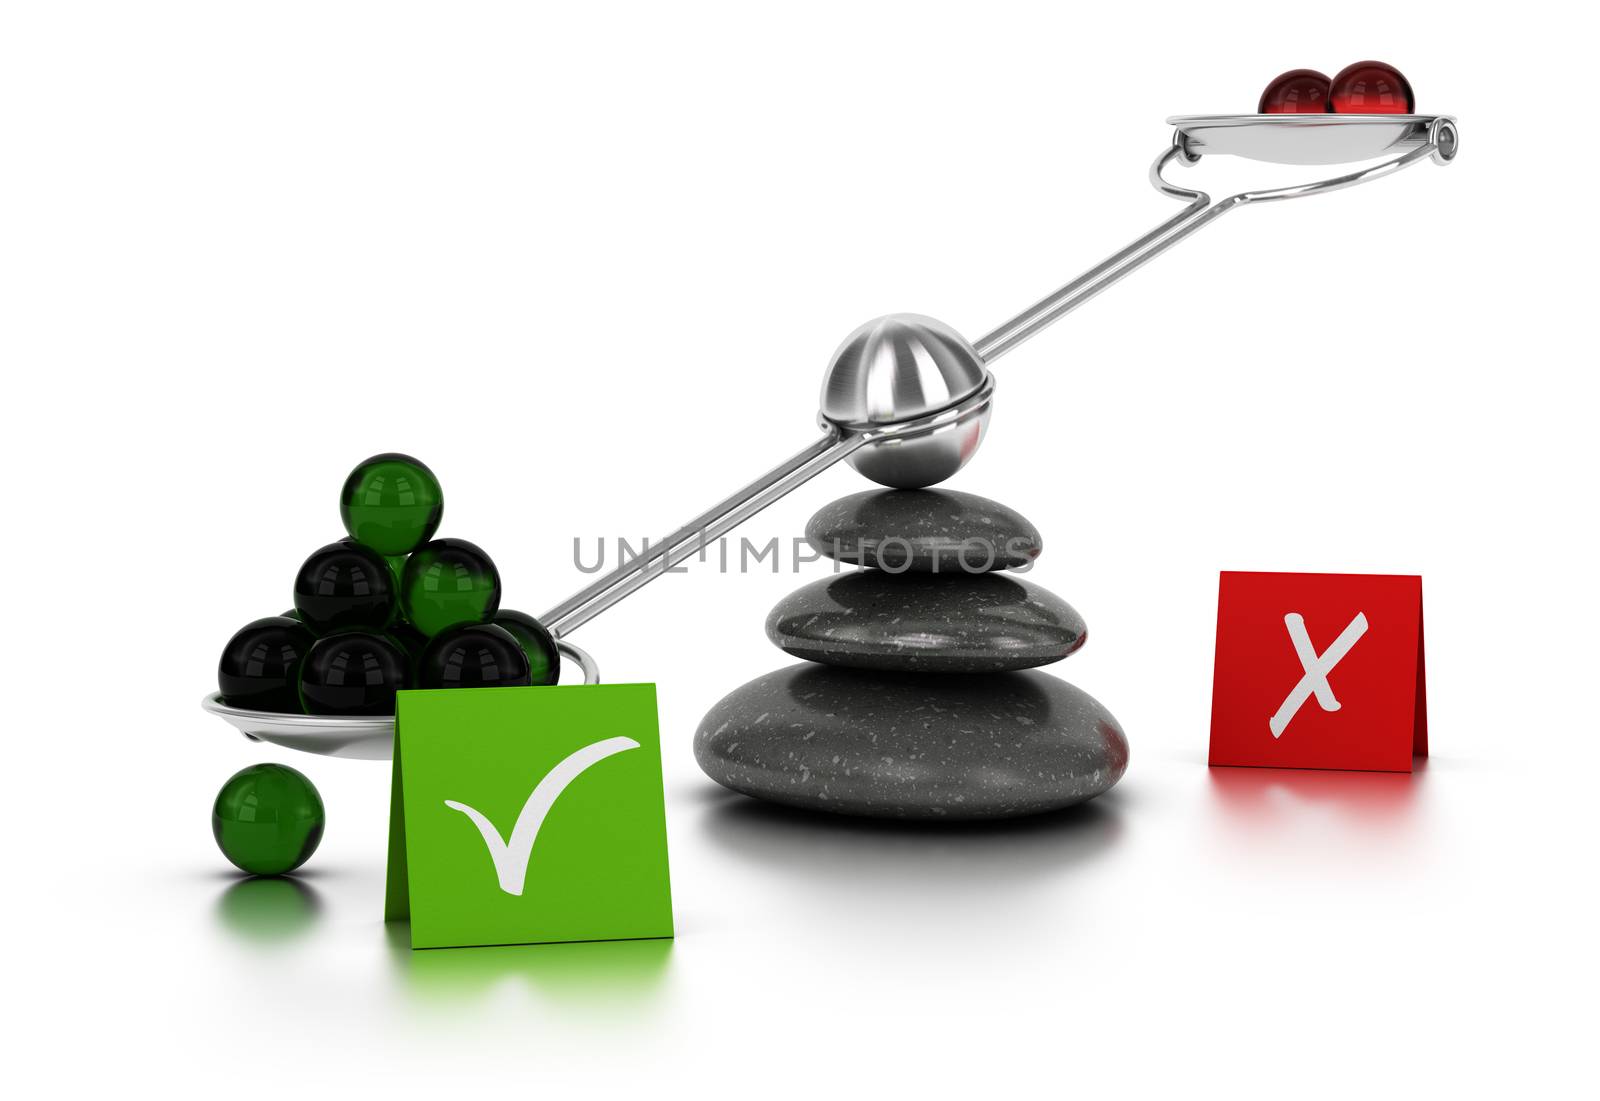 Green and red spheres on a seesaw with three black pebbles over white background. Concept image for illustration of for or against dilemma.